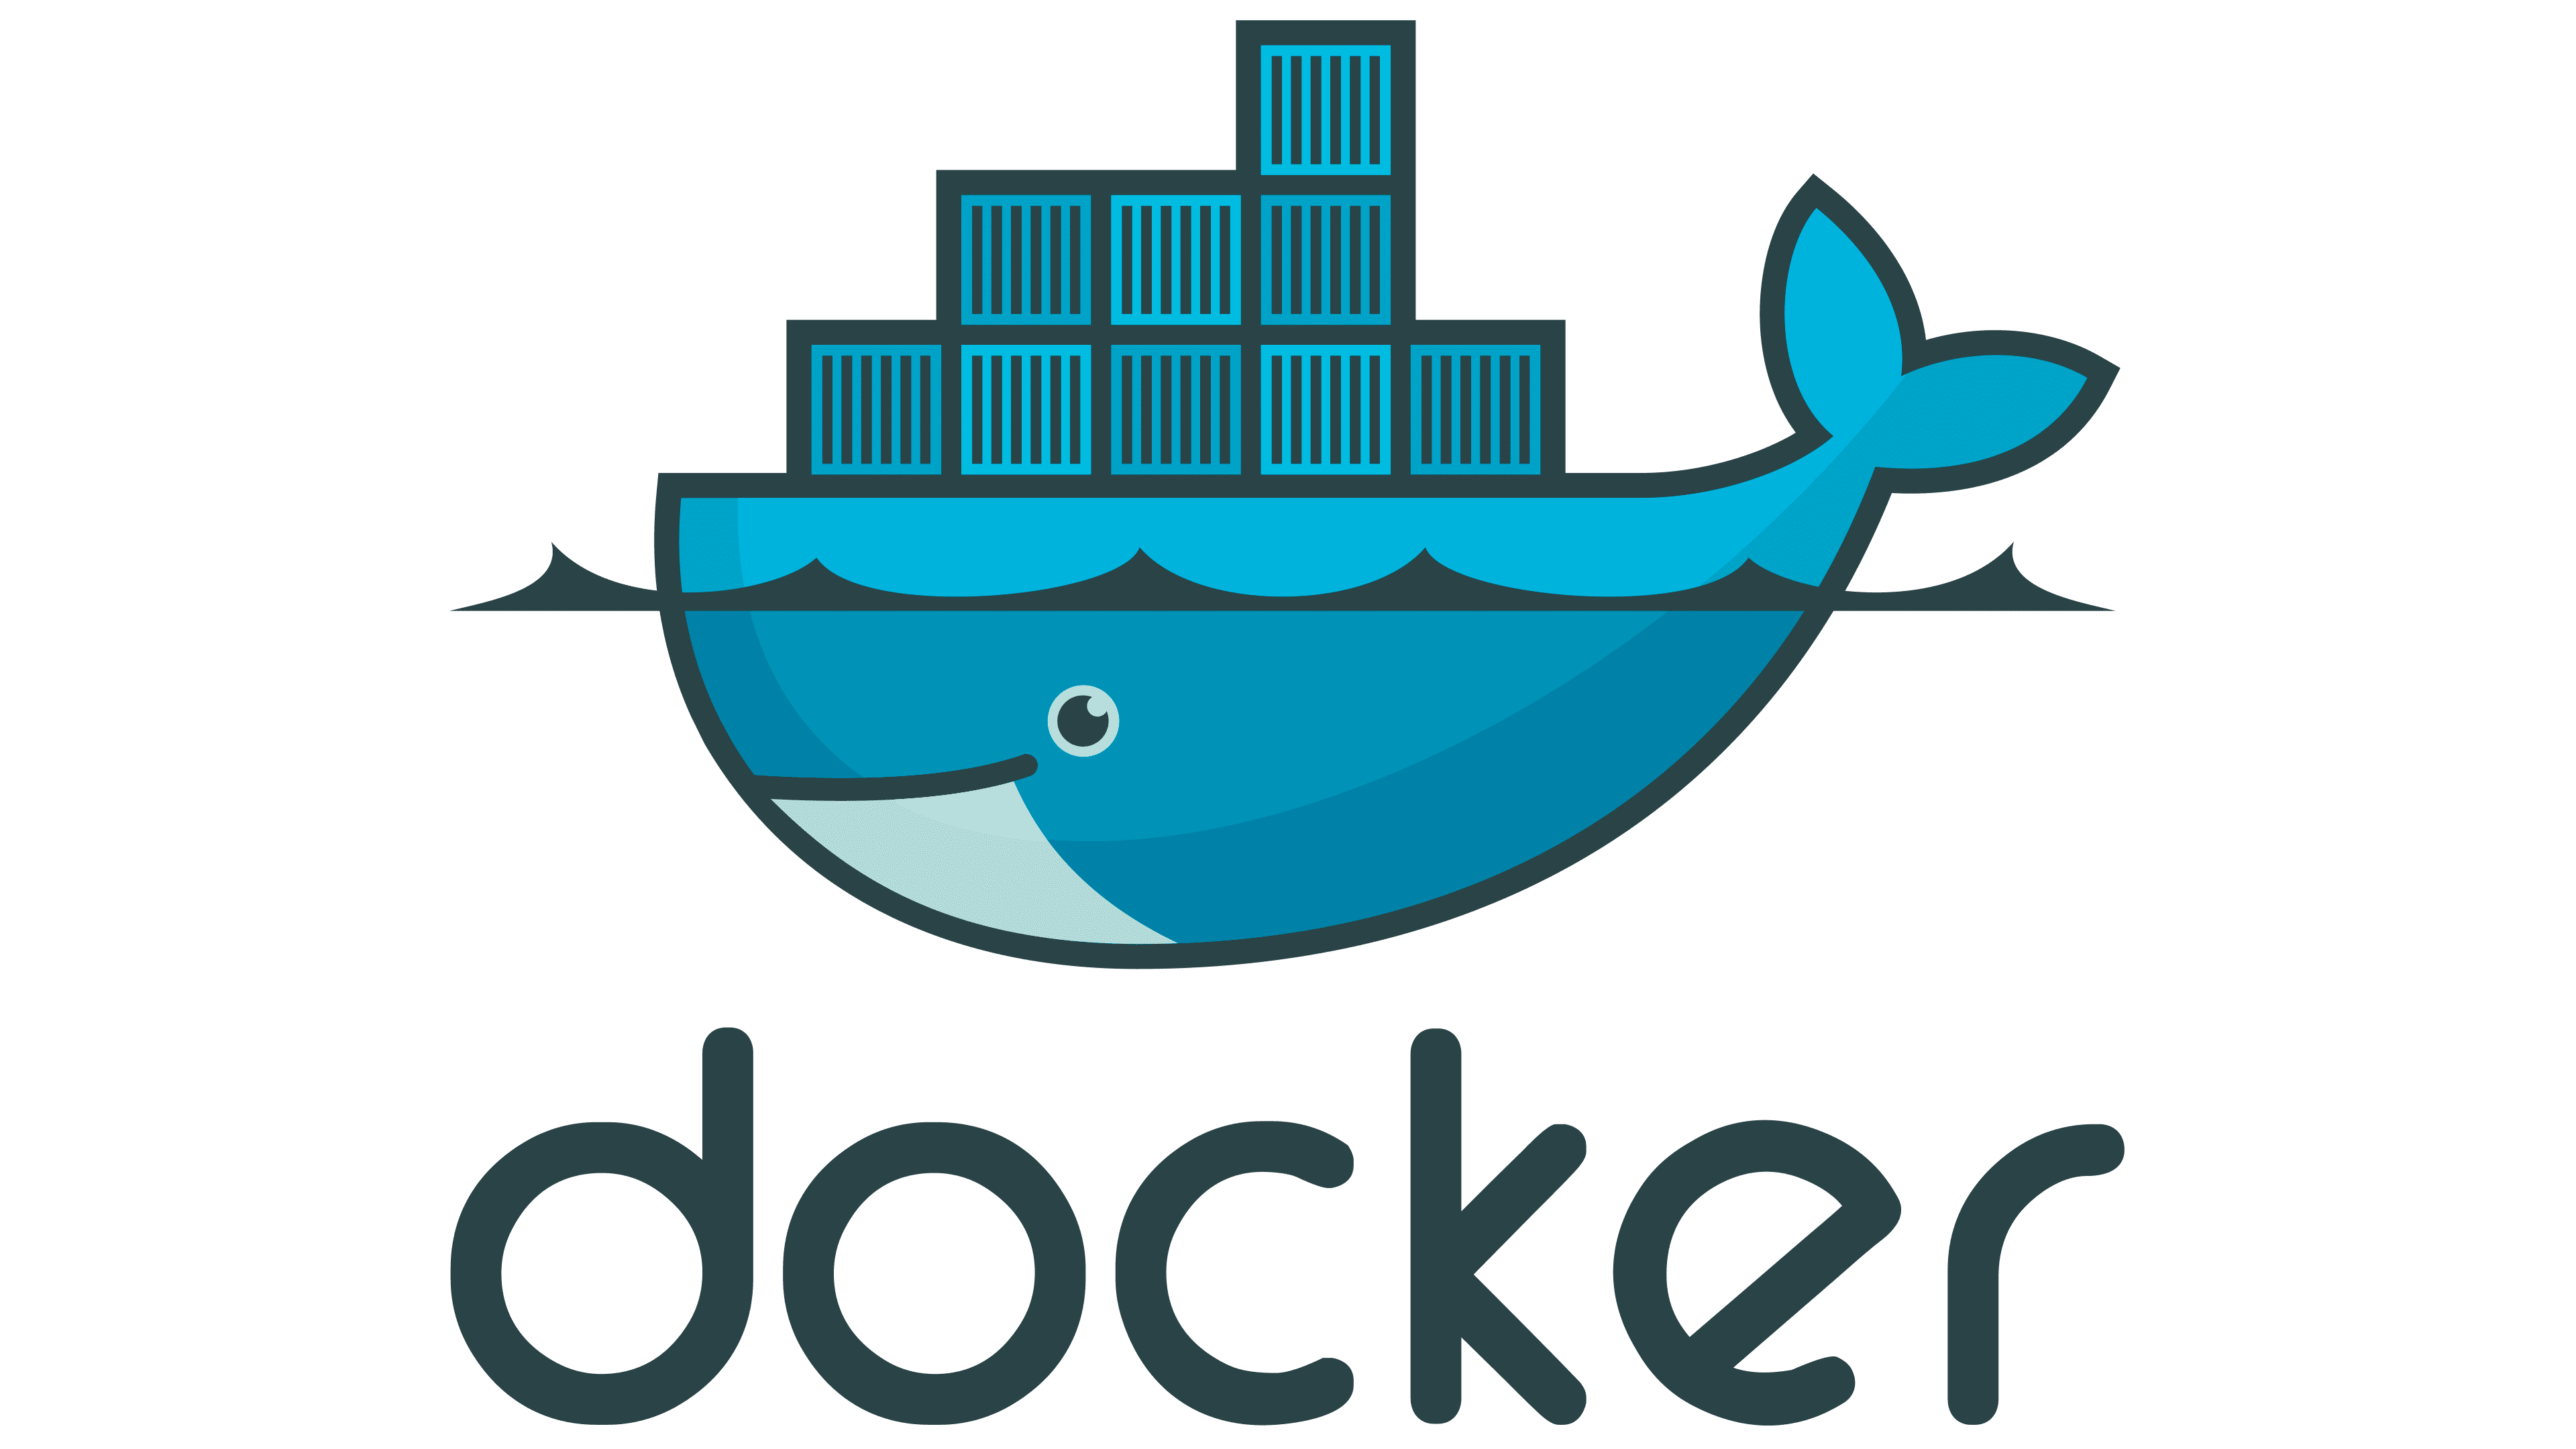 How to install and setup Docker with Cloudnium.net